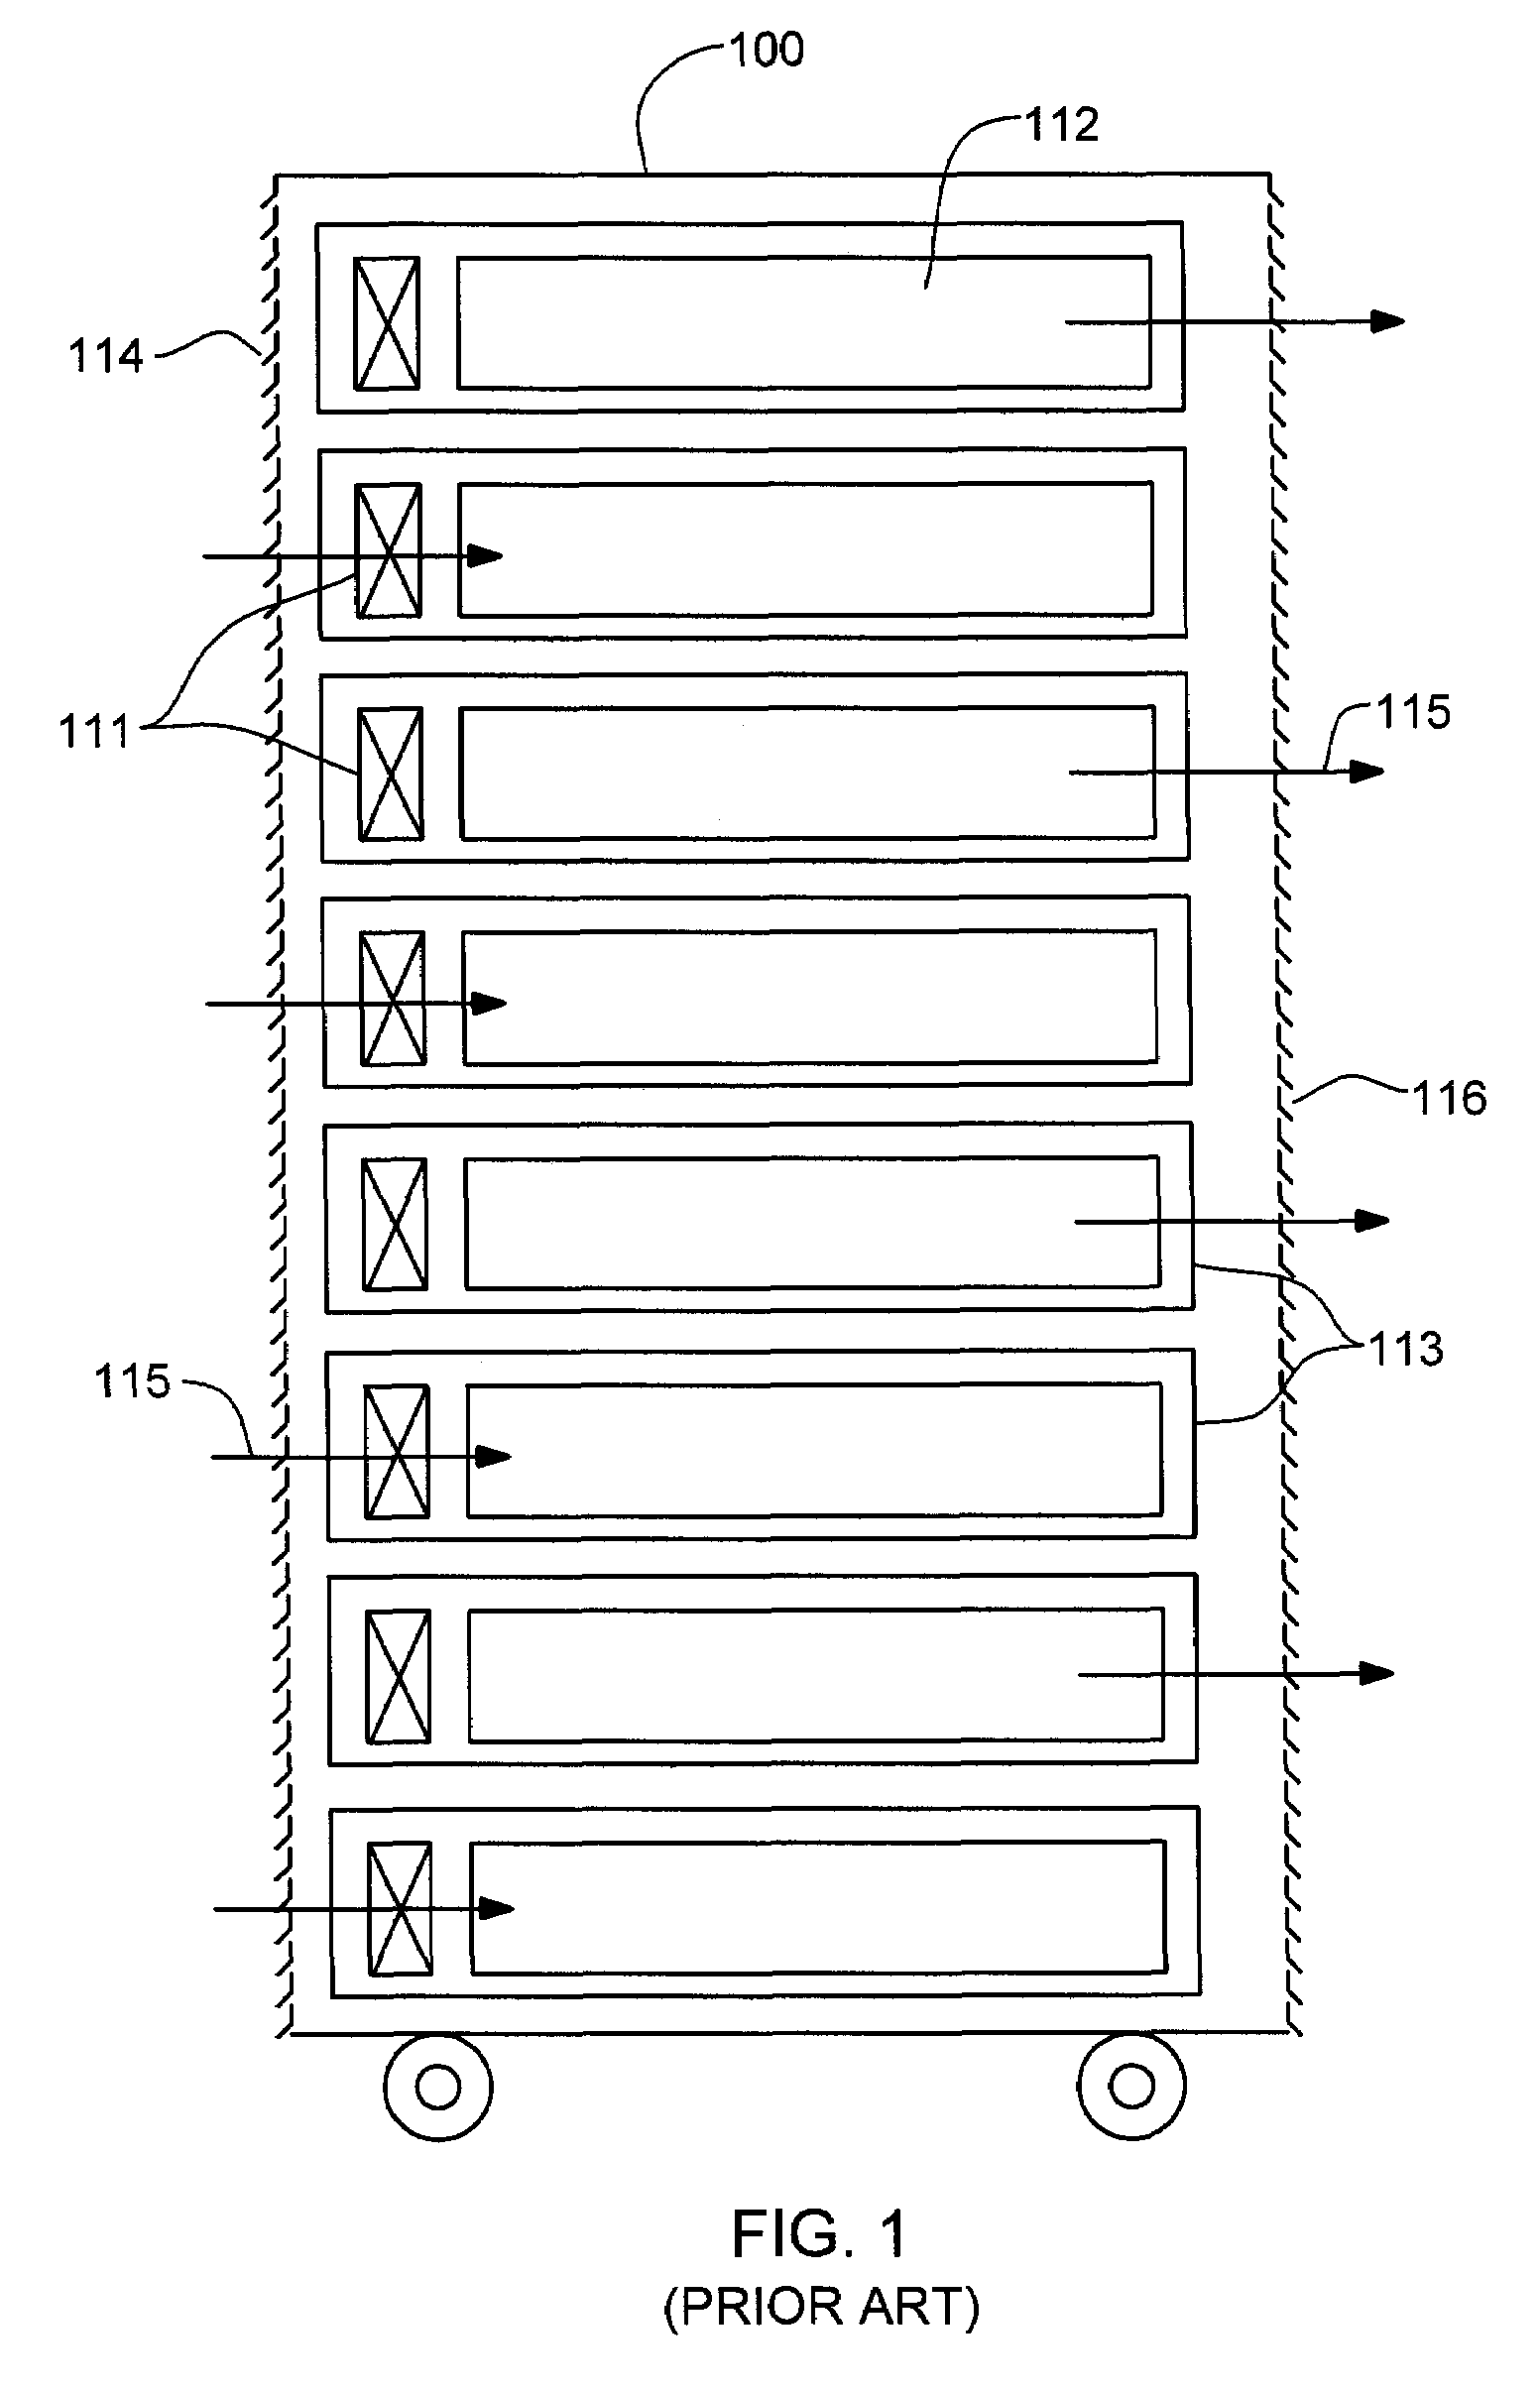 Liquid-based cooling system for cooling a multi-component electronics system